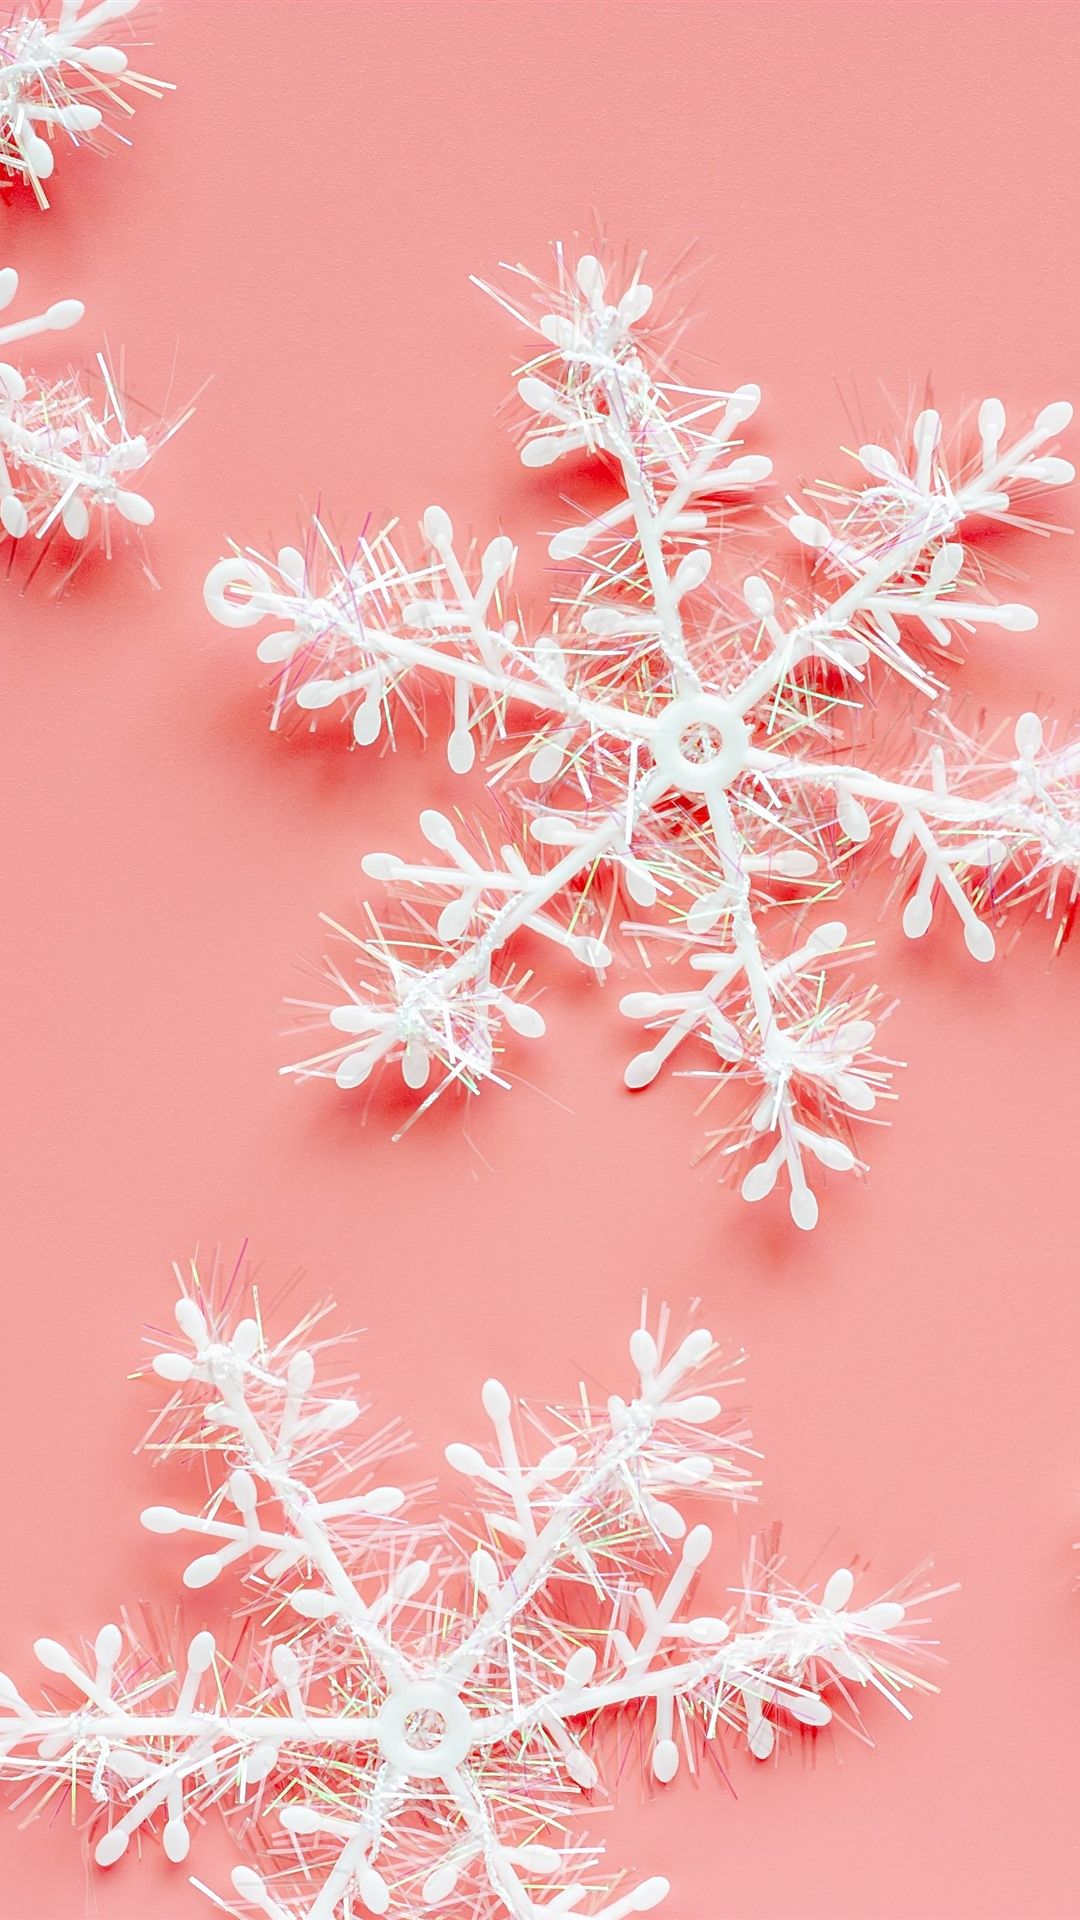 Wallpaper Snowflakes, pink background, decoration 3840x2160 UHD 4K Picture, Image